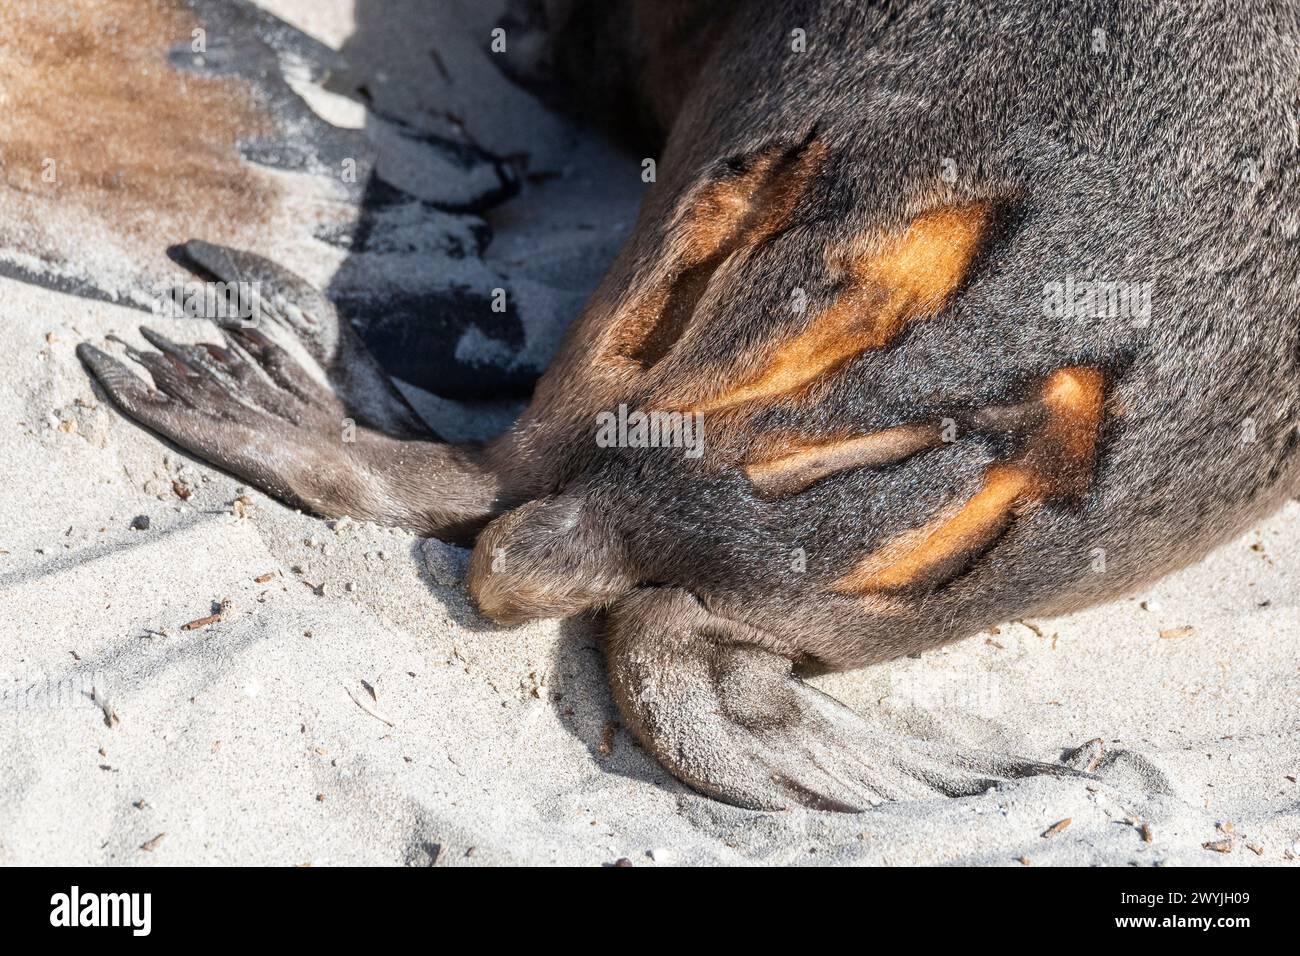 Australian sea lion (Neophoca cinerea), baby's hindquarters with scientific marking in the fur for individual identification. Stock Photo